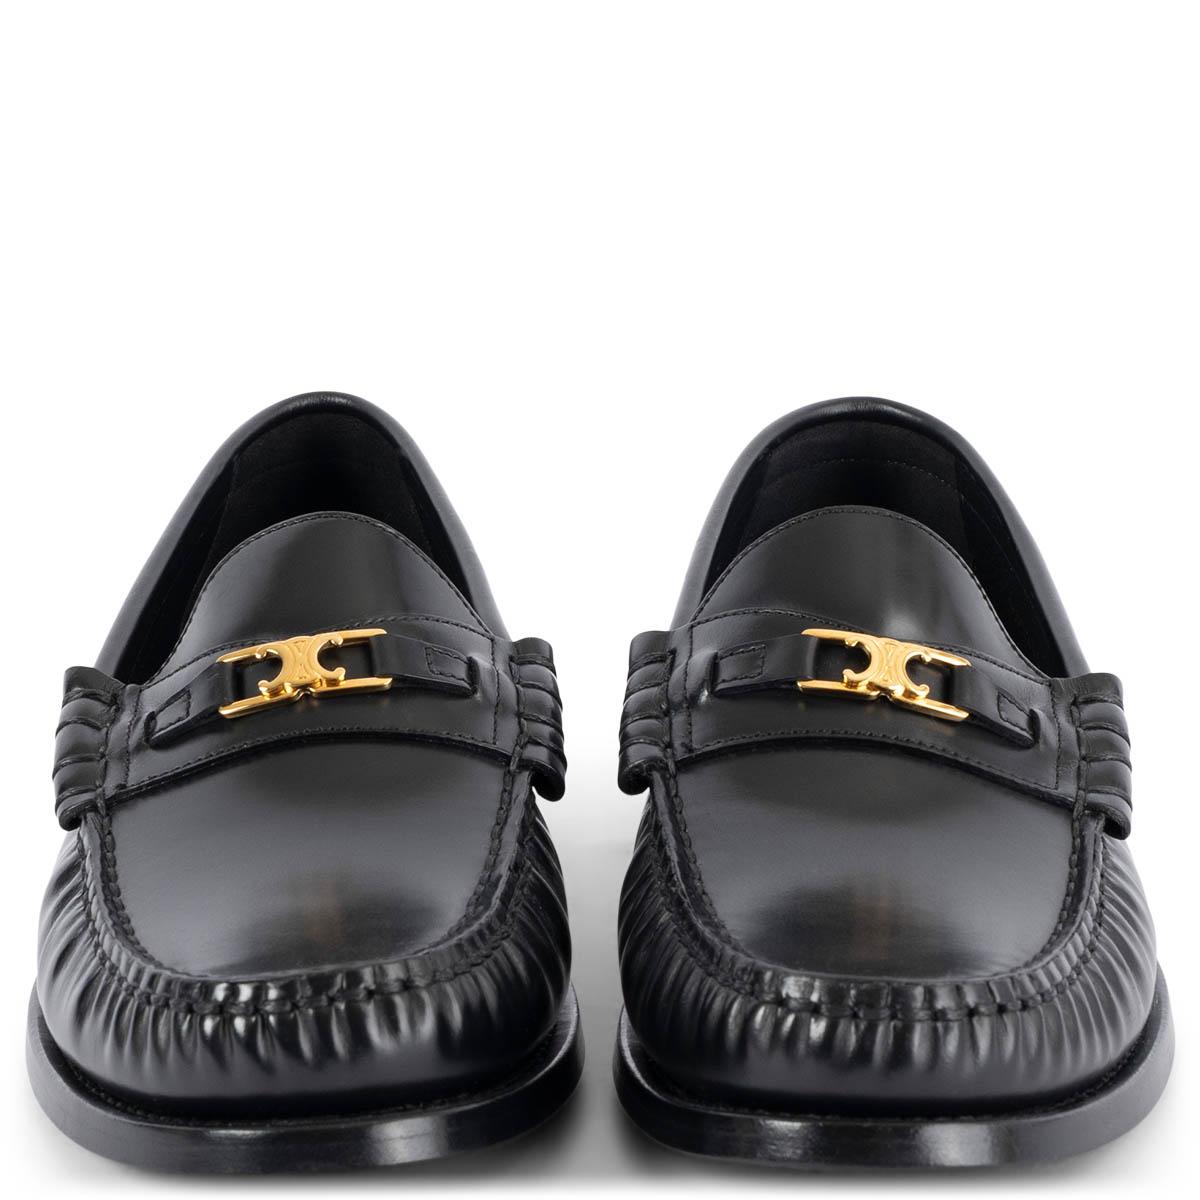 100% authentic Celine Luco Triomphe loafers in black polished calfskin featuring gold-tone hardware. Brand new.

Measurements
Imprinted Size	38.5
Shoe Size	38.5
Inside Sole	25.5cm (9.9in)
Width	8cm (3.1in)
Heel	2cm (0.8in)
Hardware	Gold-Tone

All